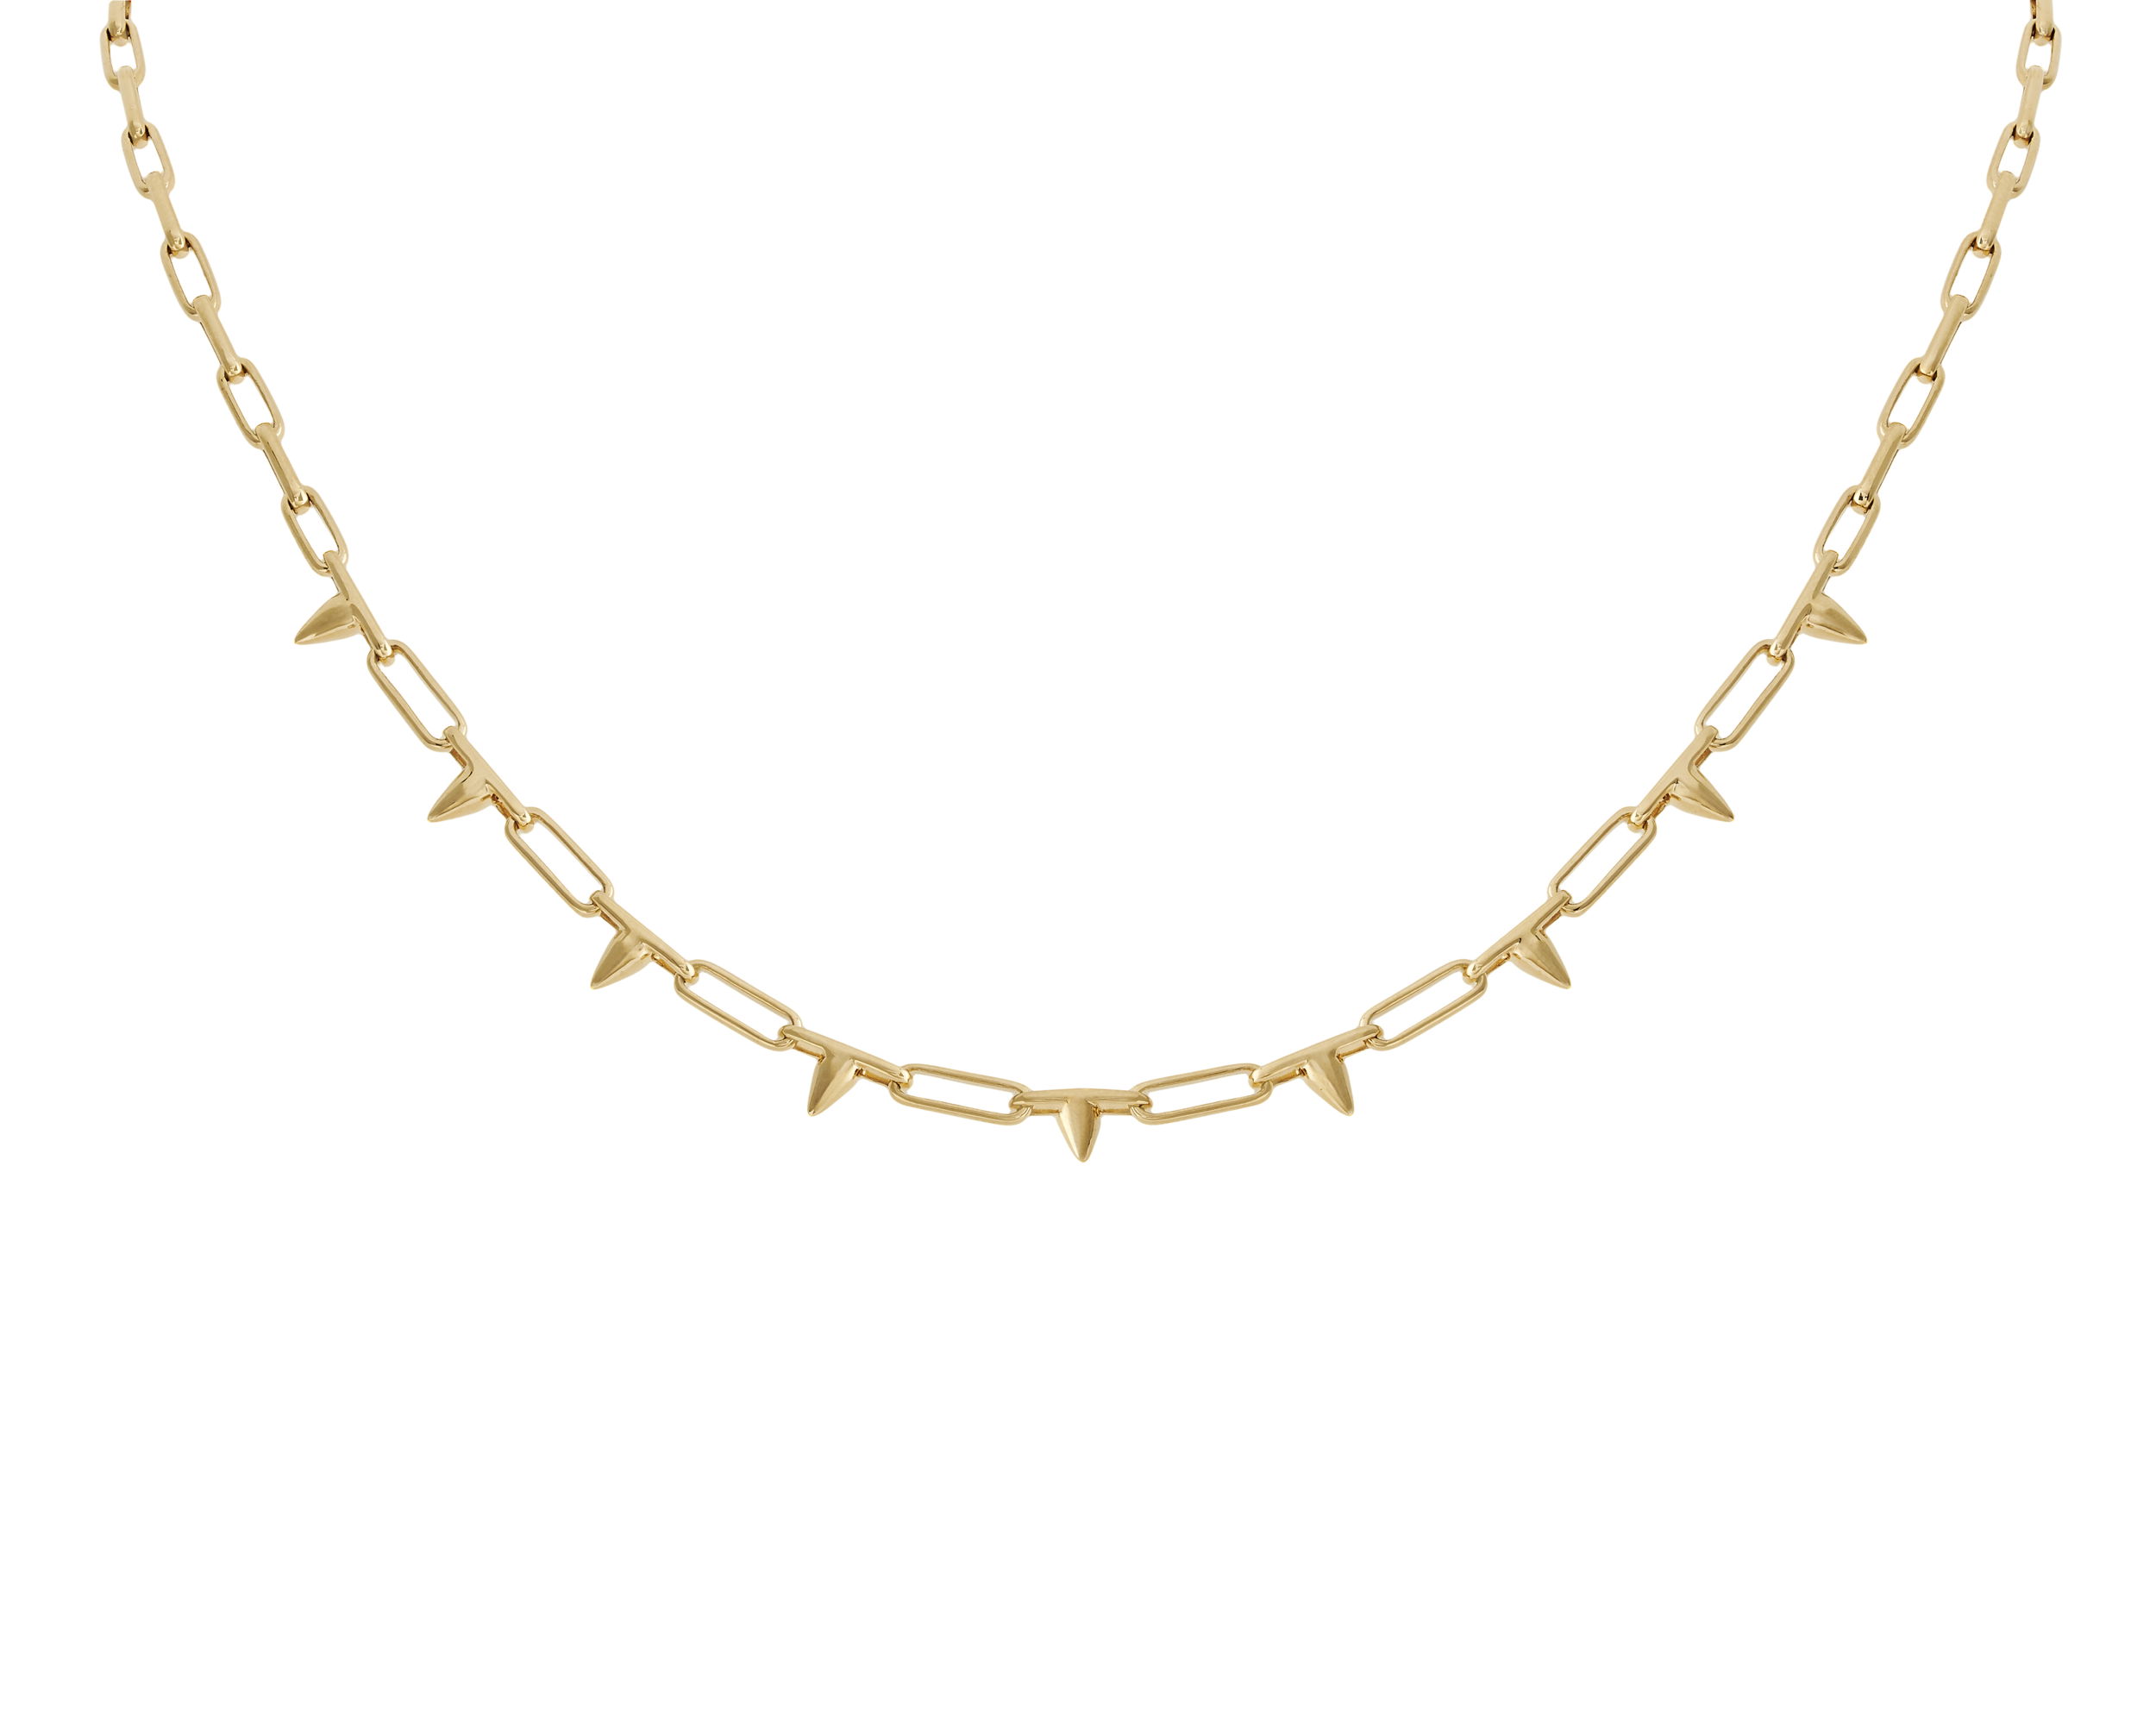 No Regrets Russian Roulette Chain Necklace in 18kt Yellow Gold - 17"